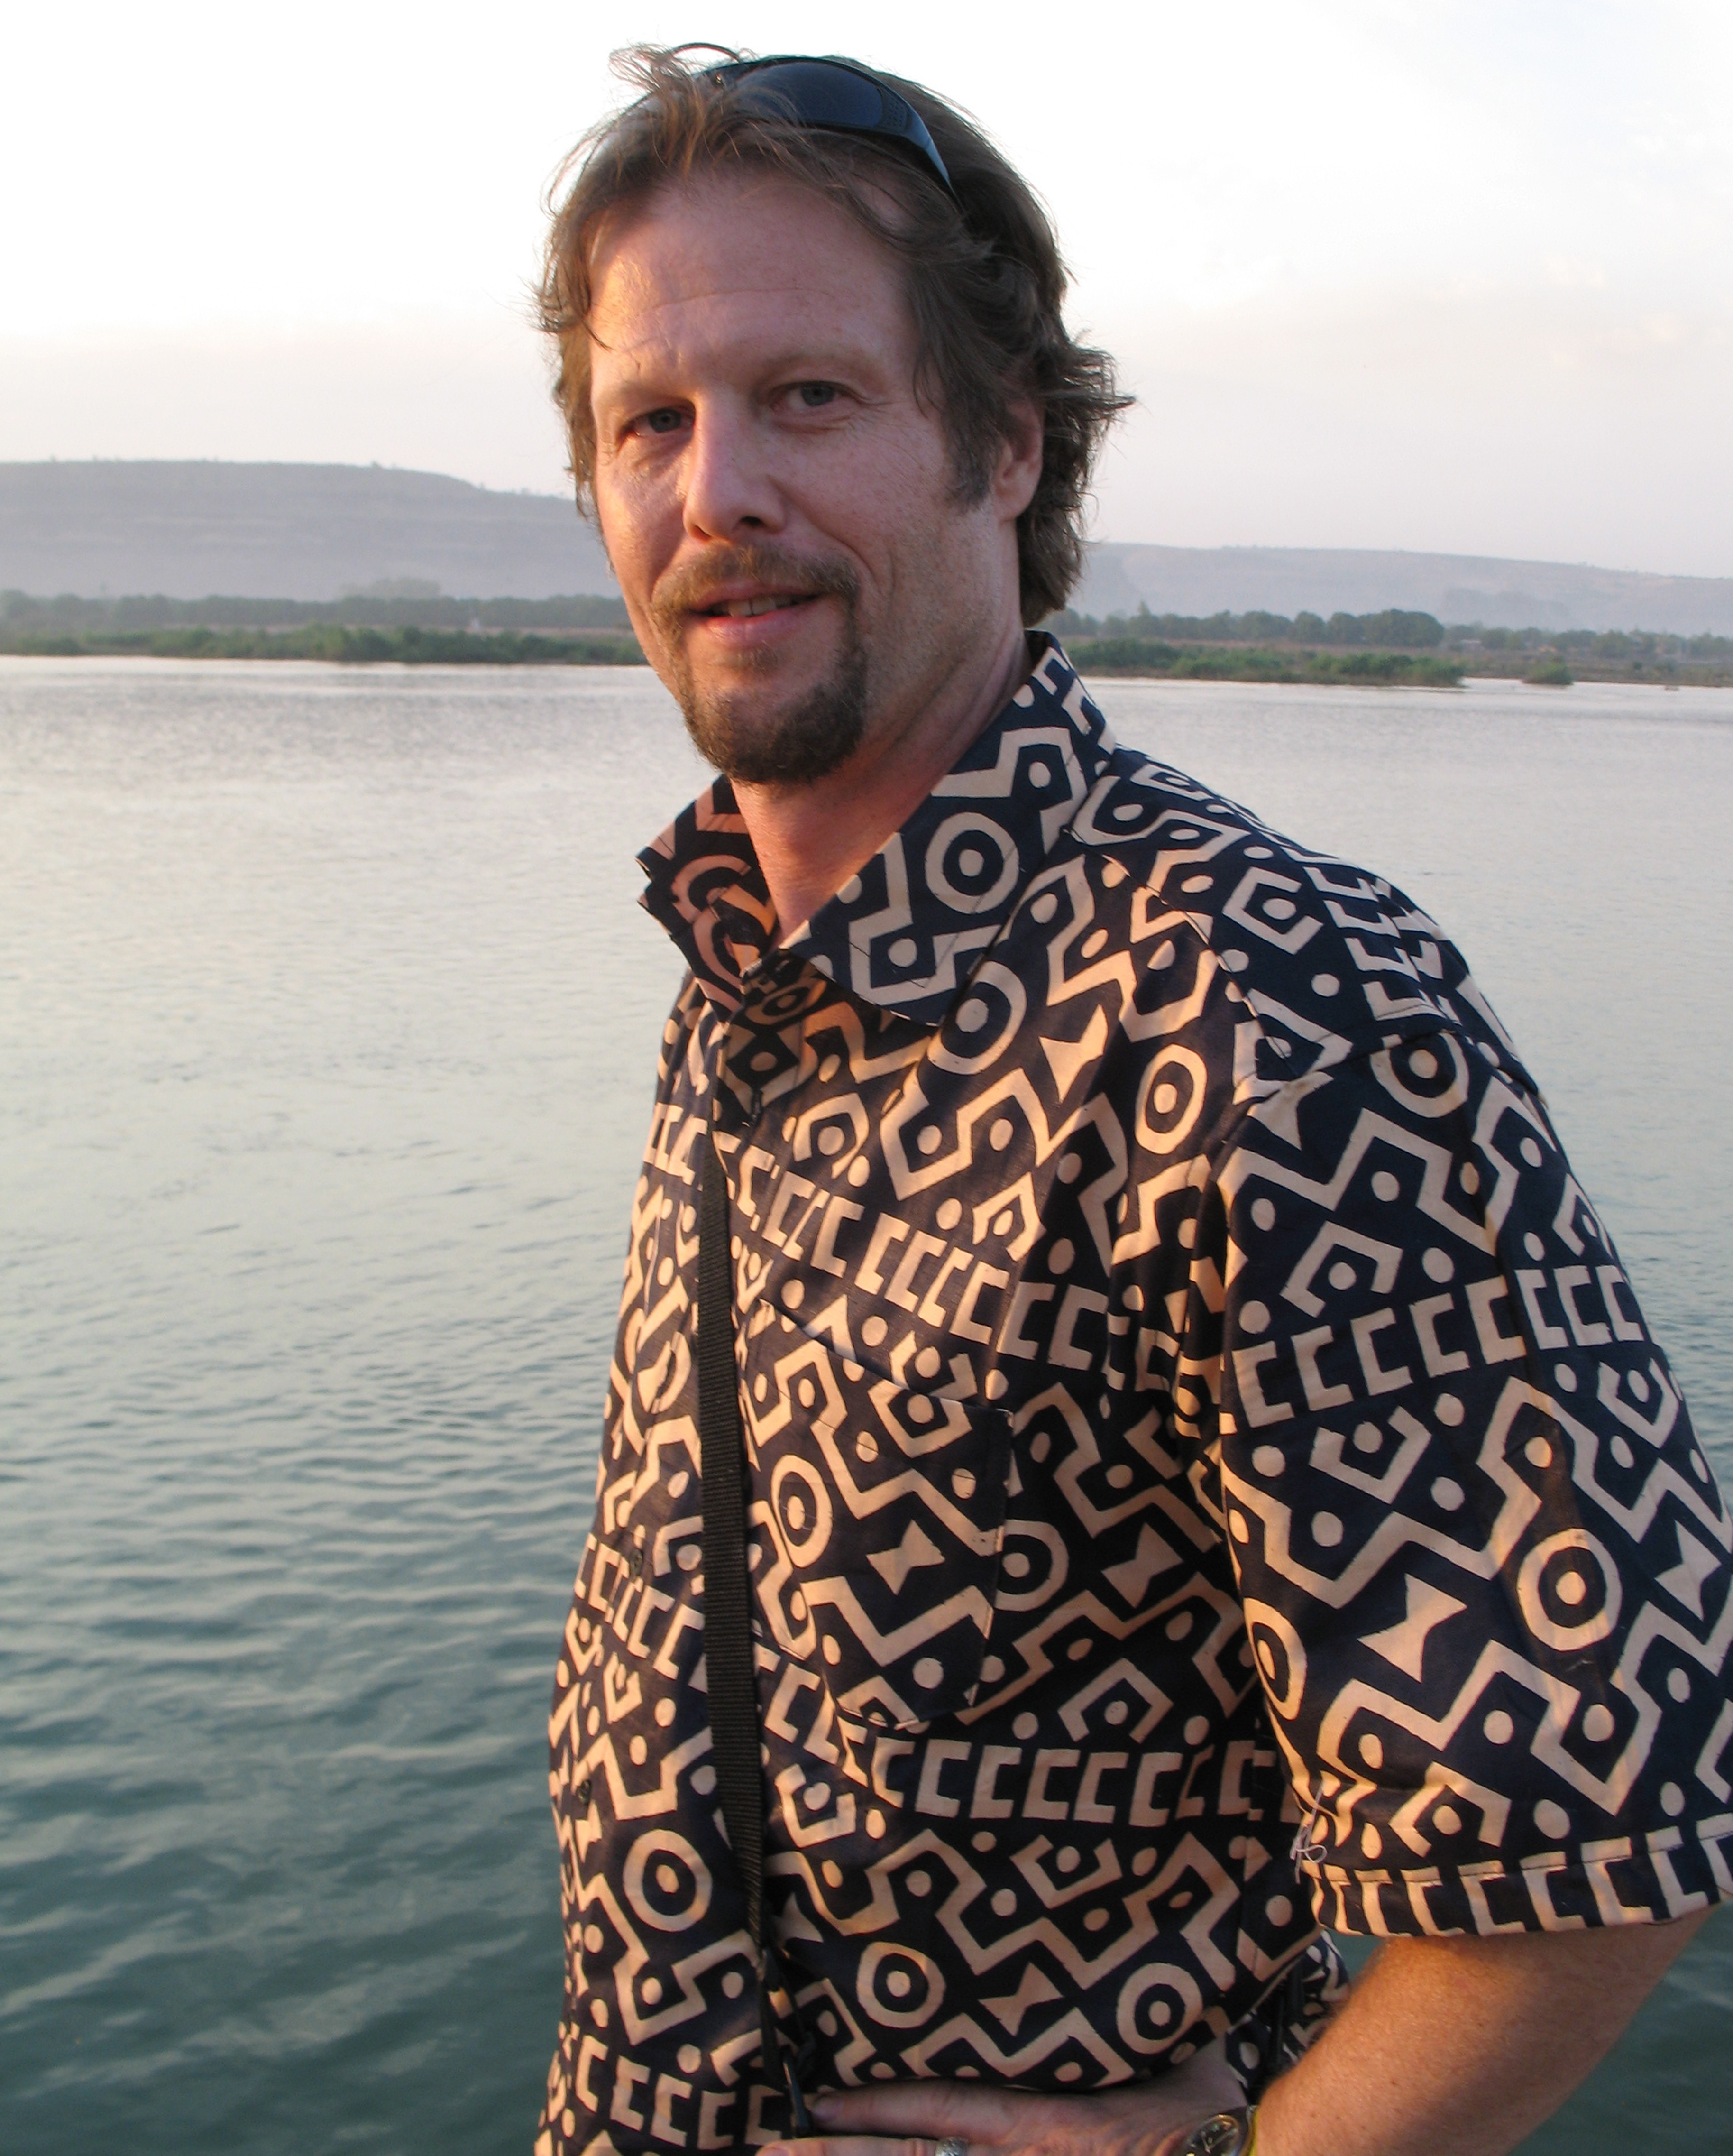 On the Niger River, Mali, West Africa, researching for my feature screenplay, 